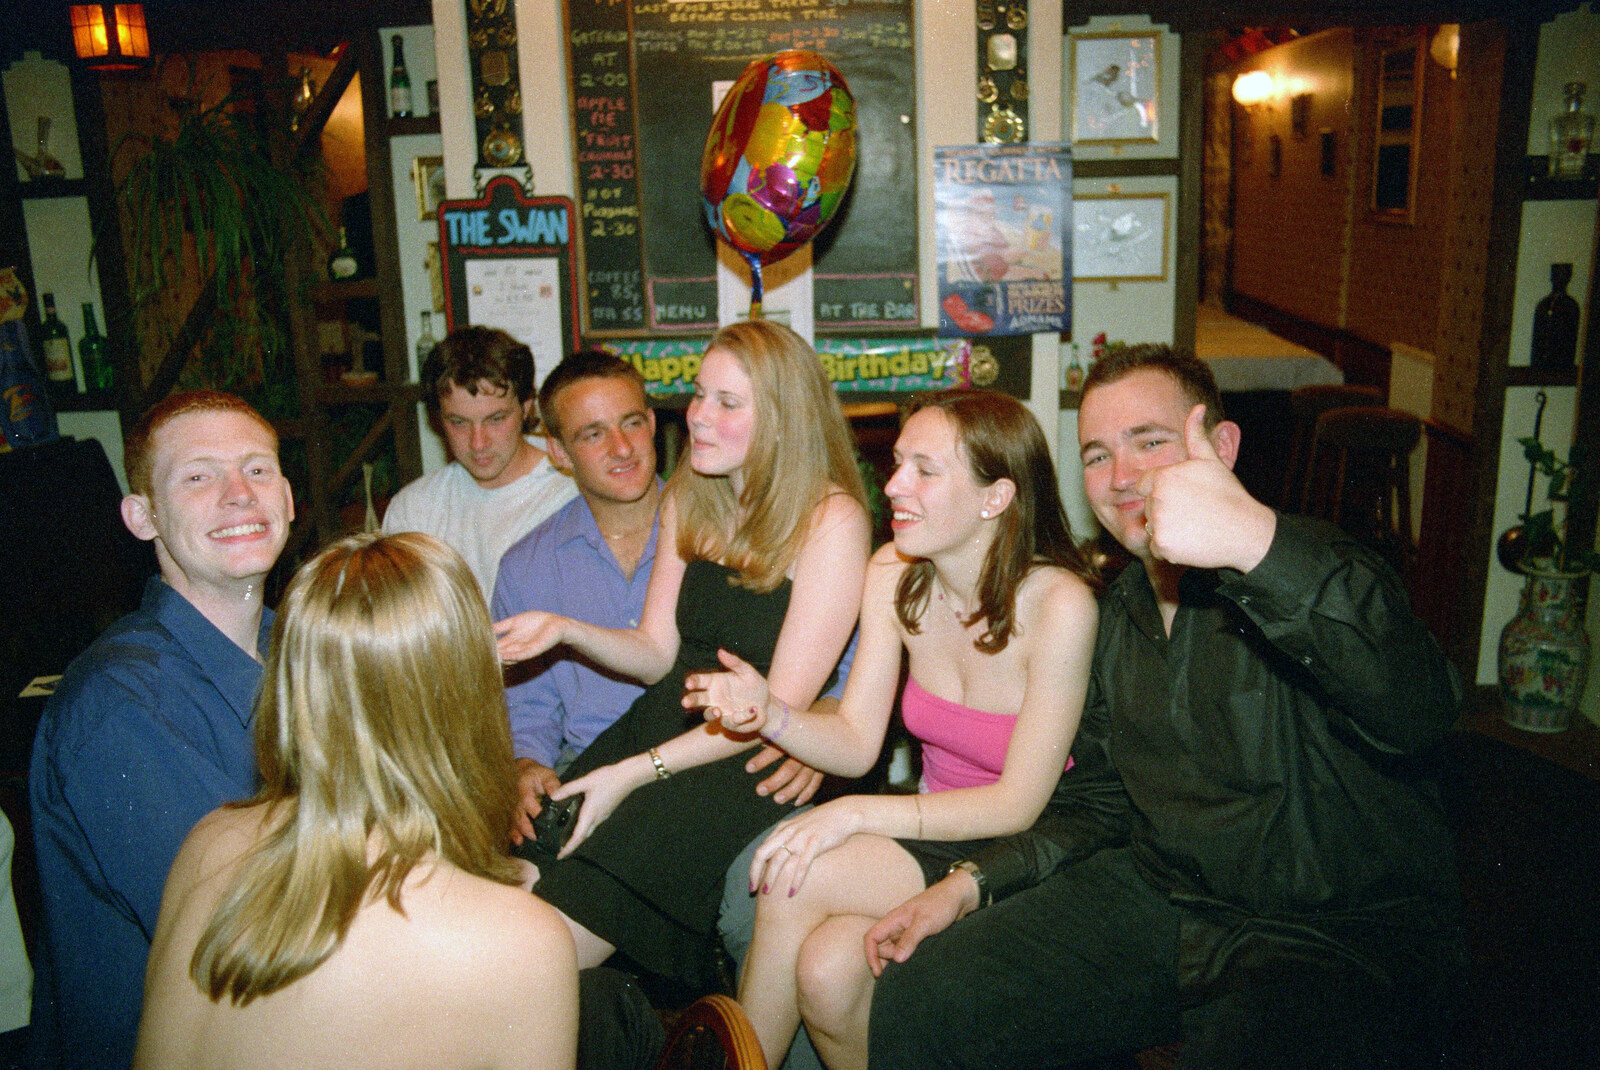 Thumbs up from Lorraine's 21st Birthday, The Swan, Suffolk - 10th June 2000